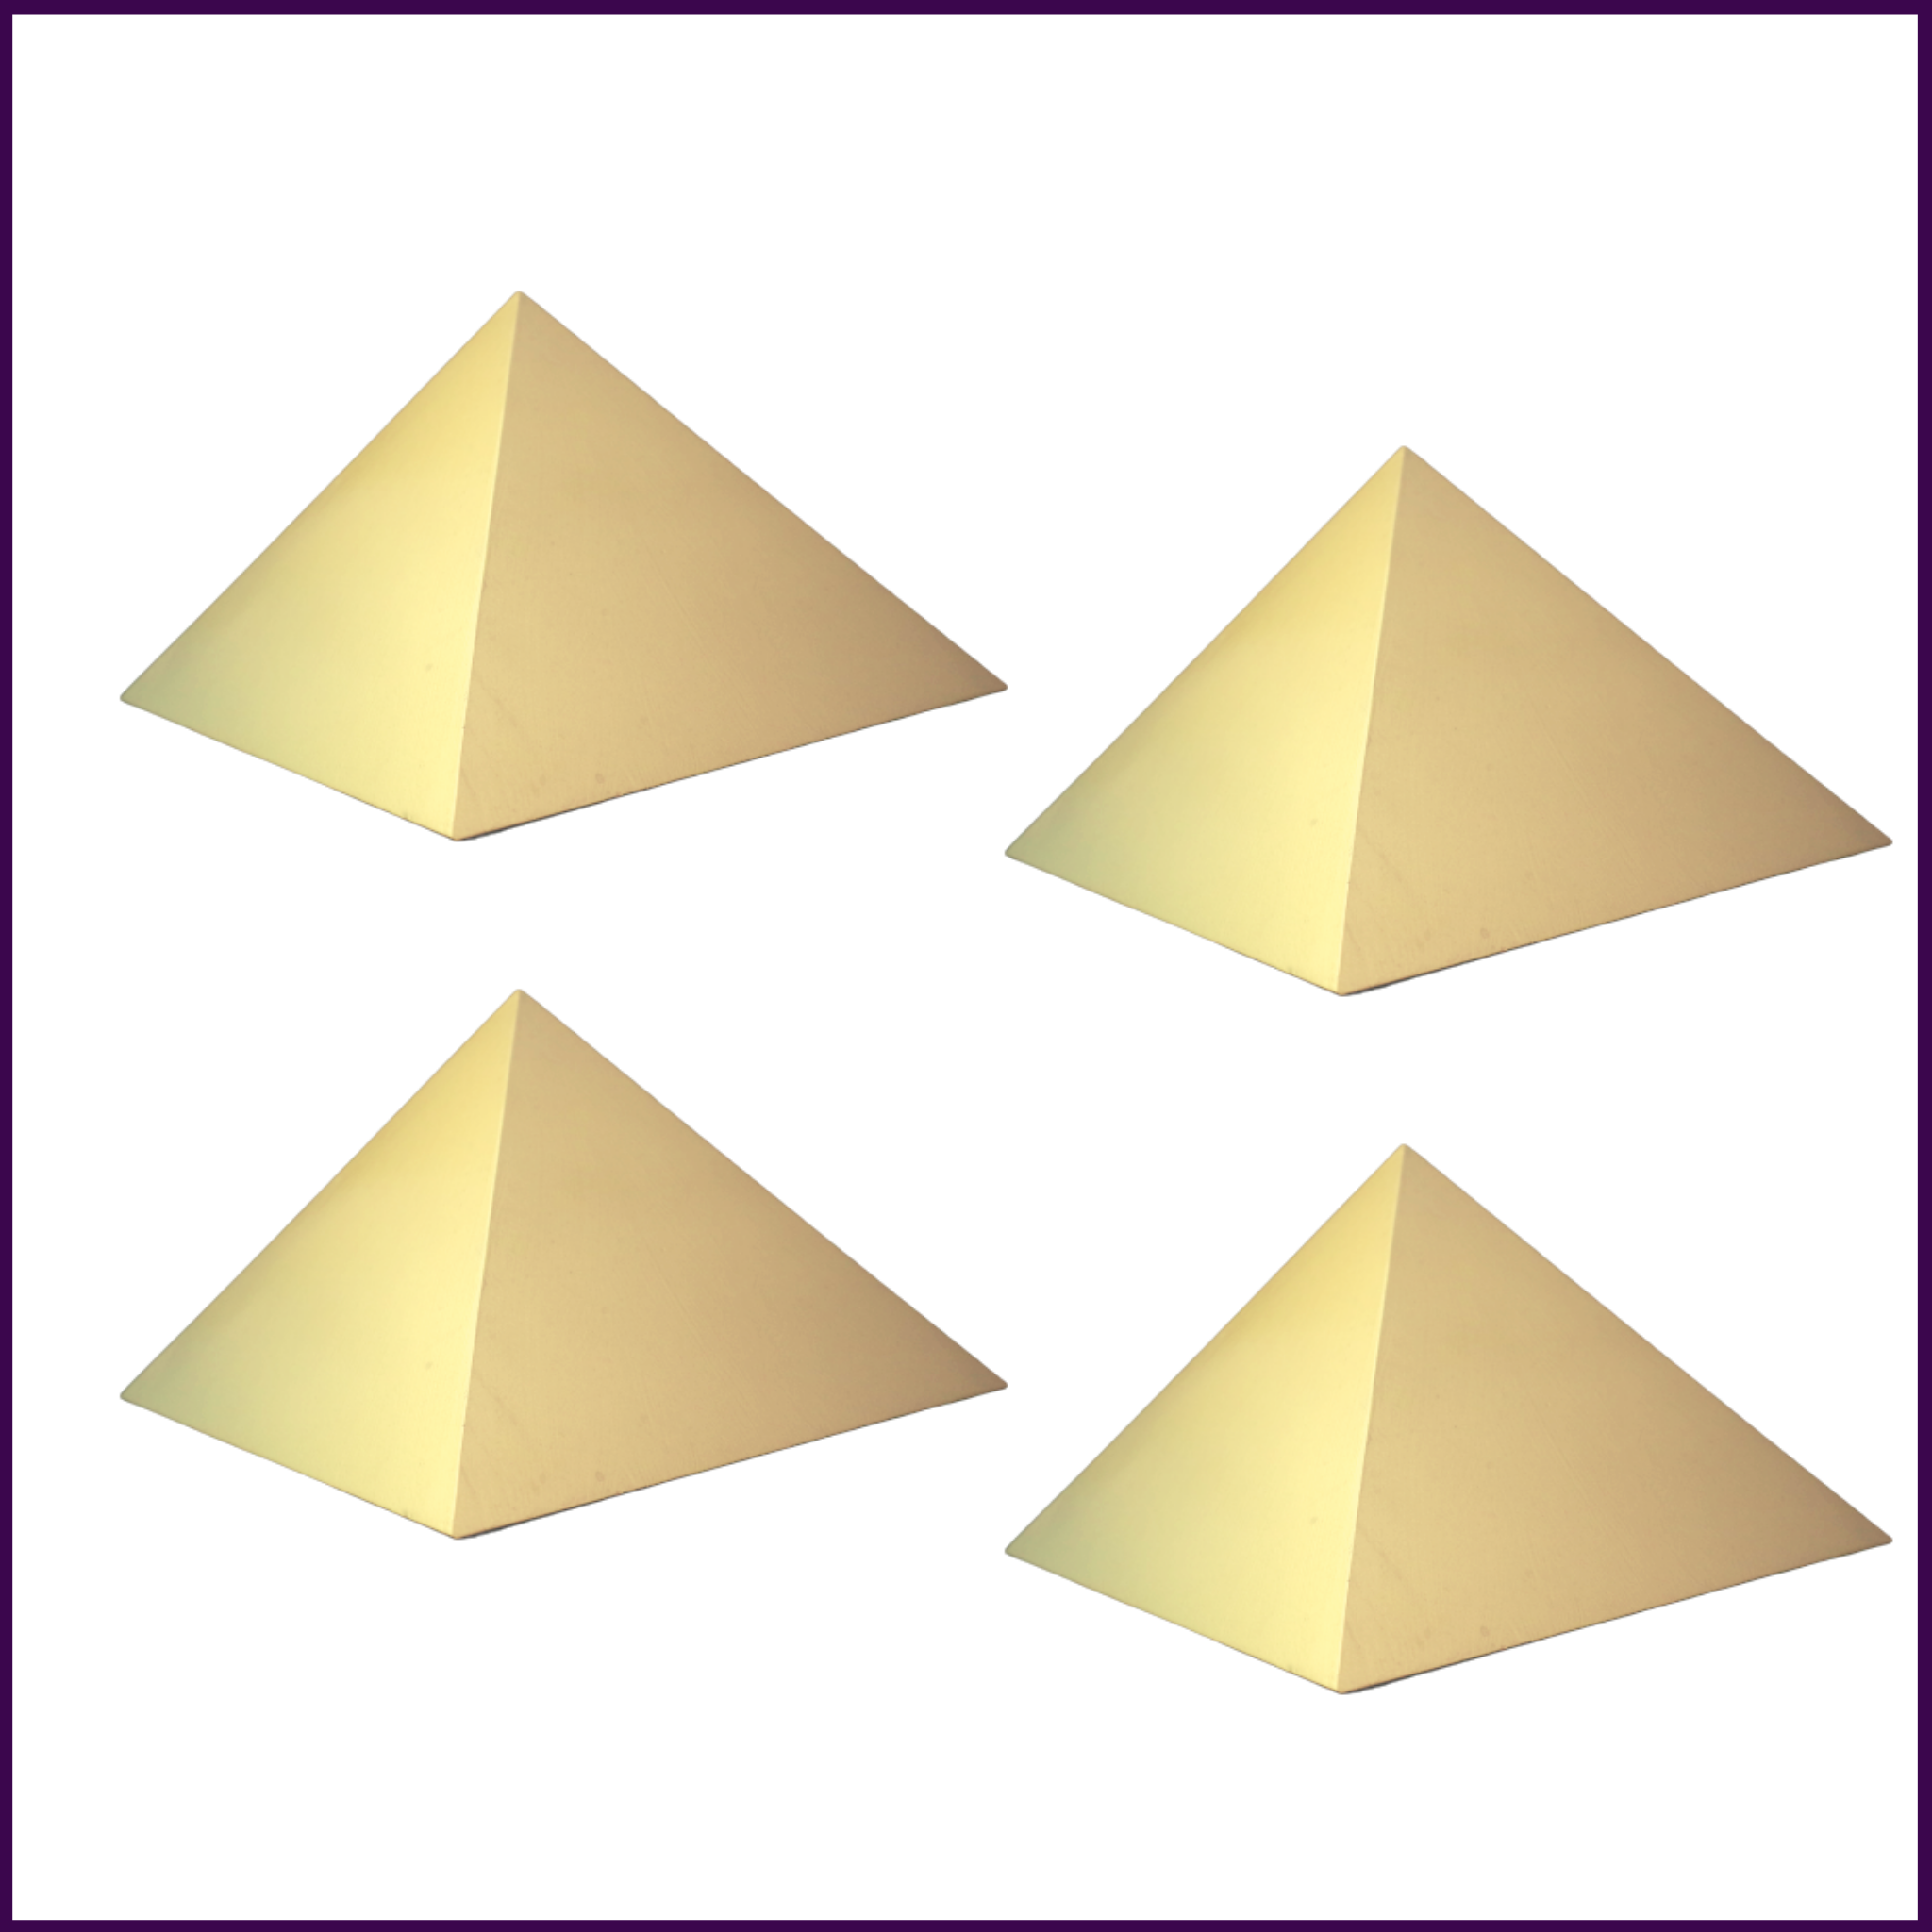 Set of 4 - 6inch MDF Wood Pyramid Cap (Gold color painted) - For Four Corners of Your Home/Room - 51pyramids